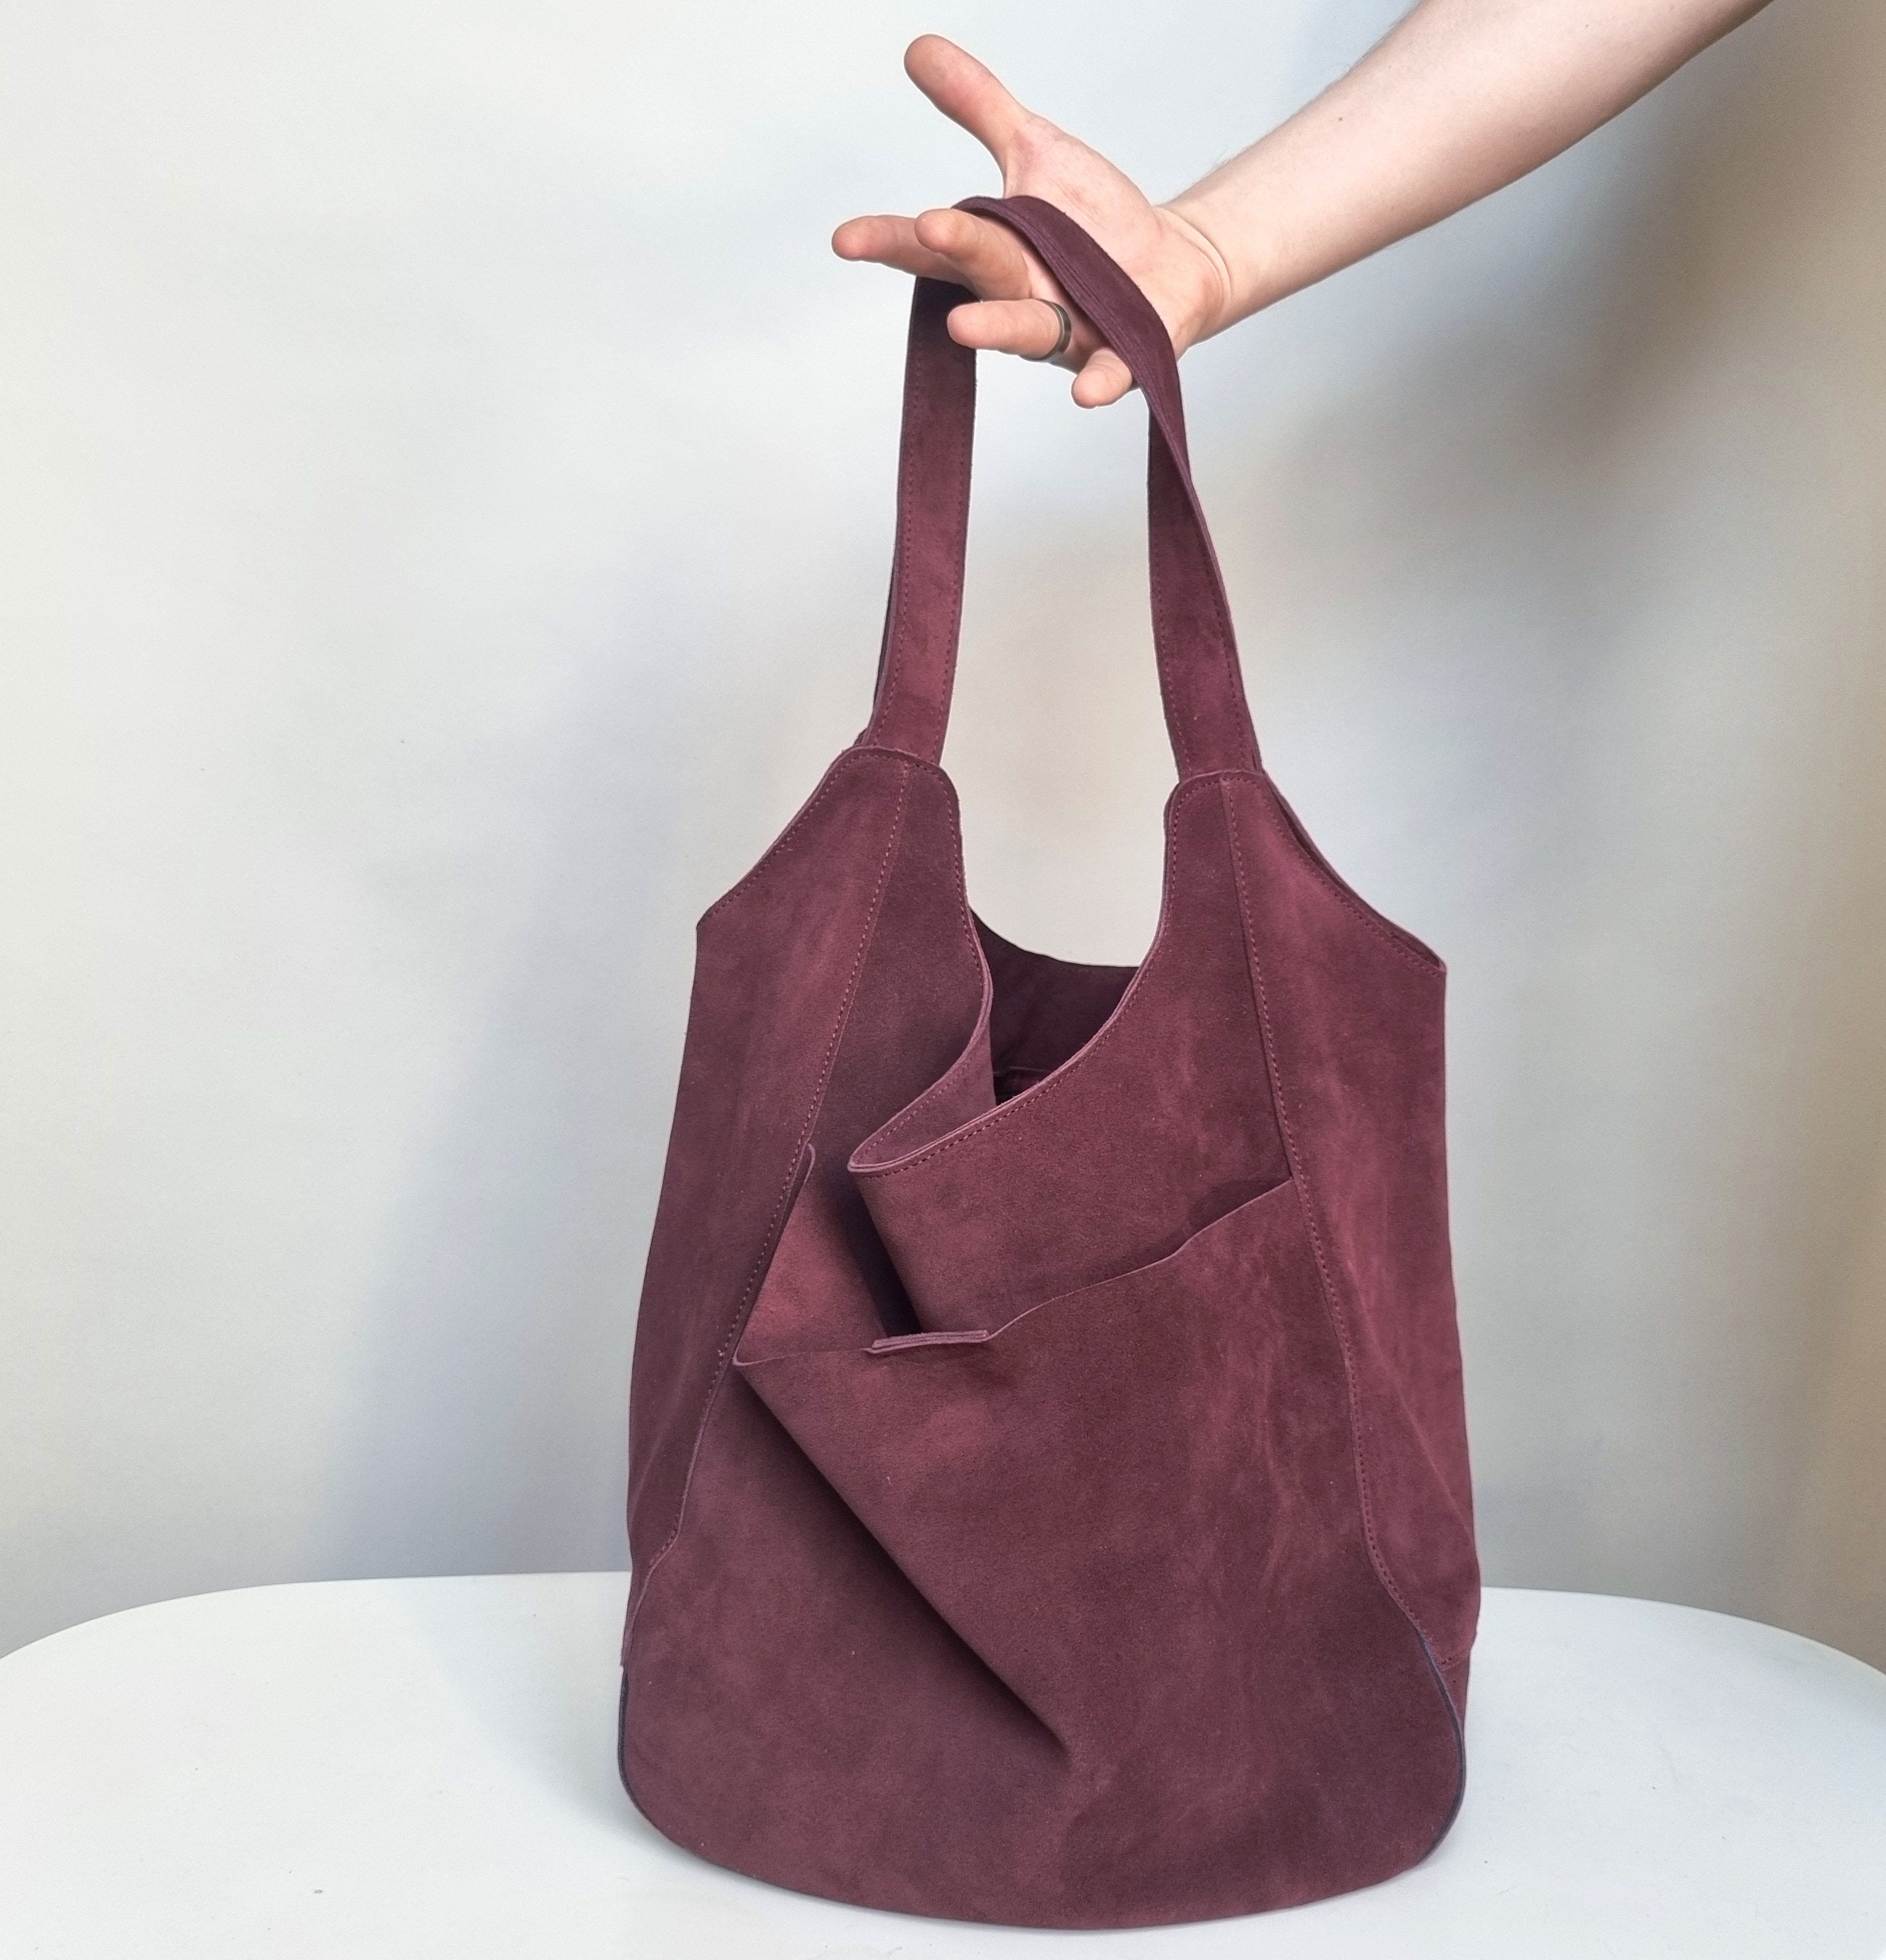 Attention Cuyana tote bag and backpack owners! : r/handbags